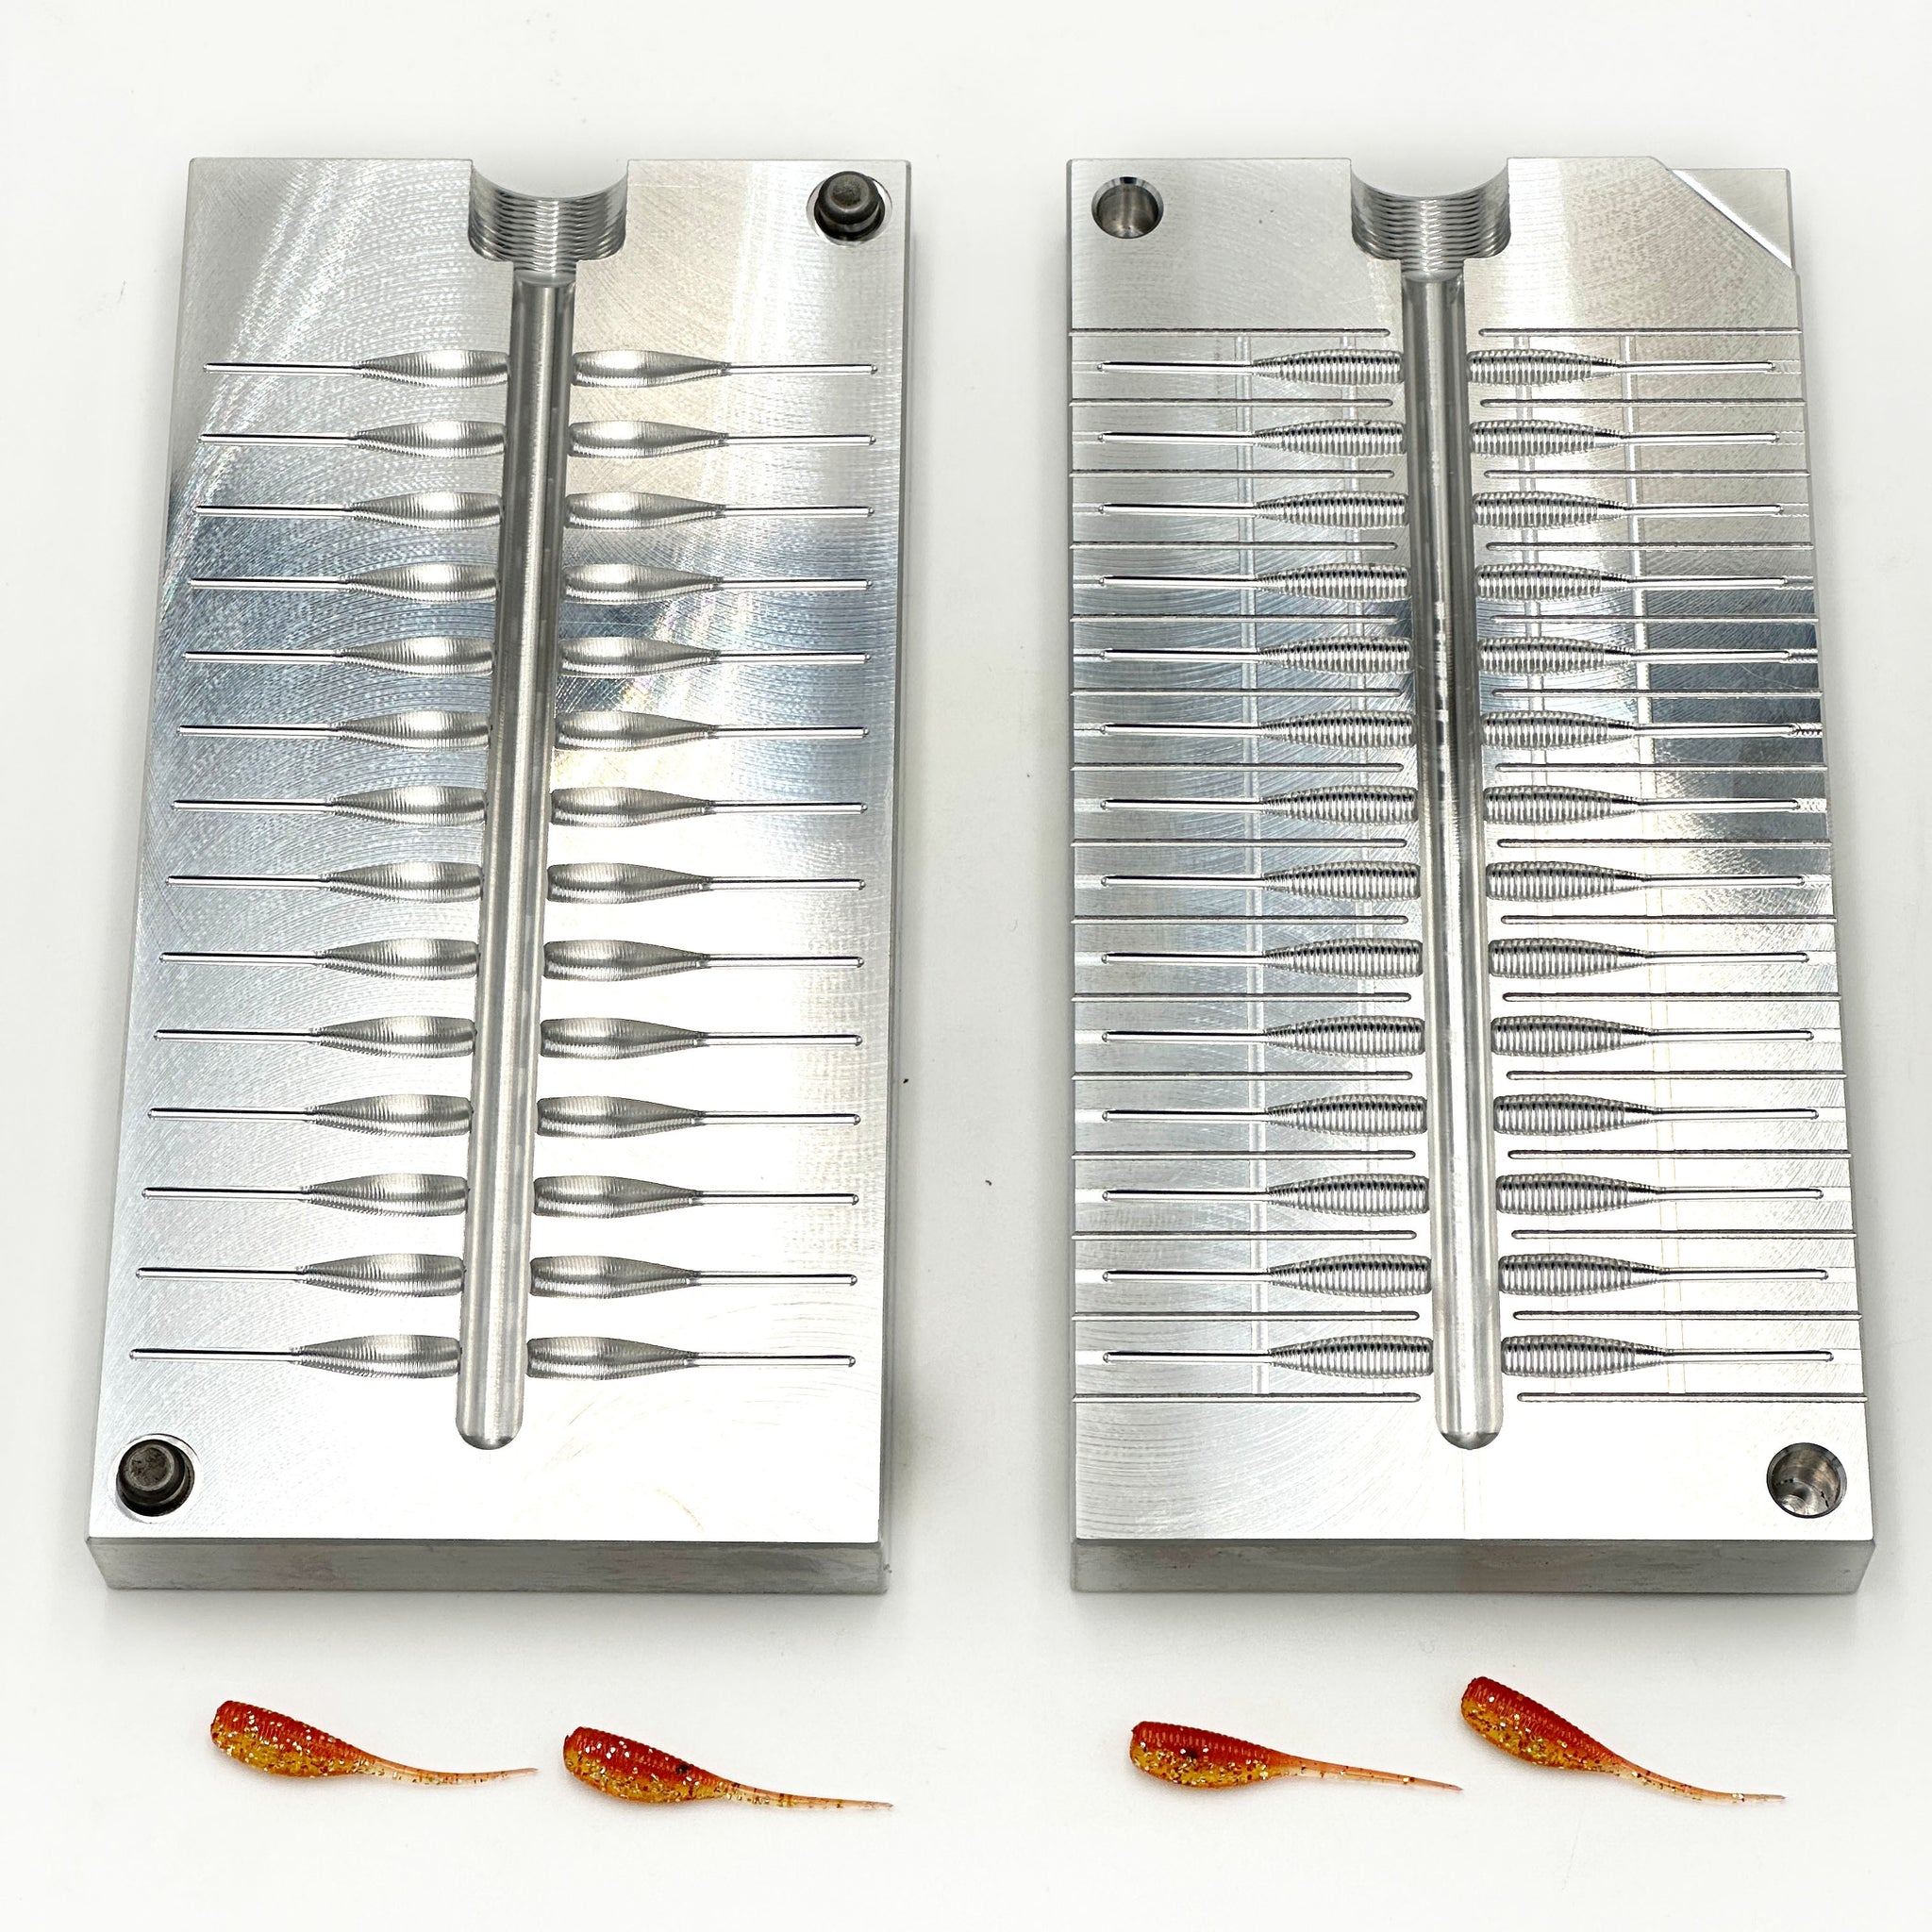 Crappie Molds - Aluminum Molds for Crappie Jigs